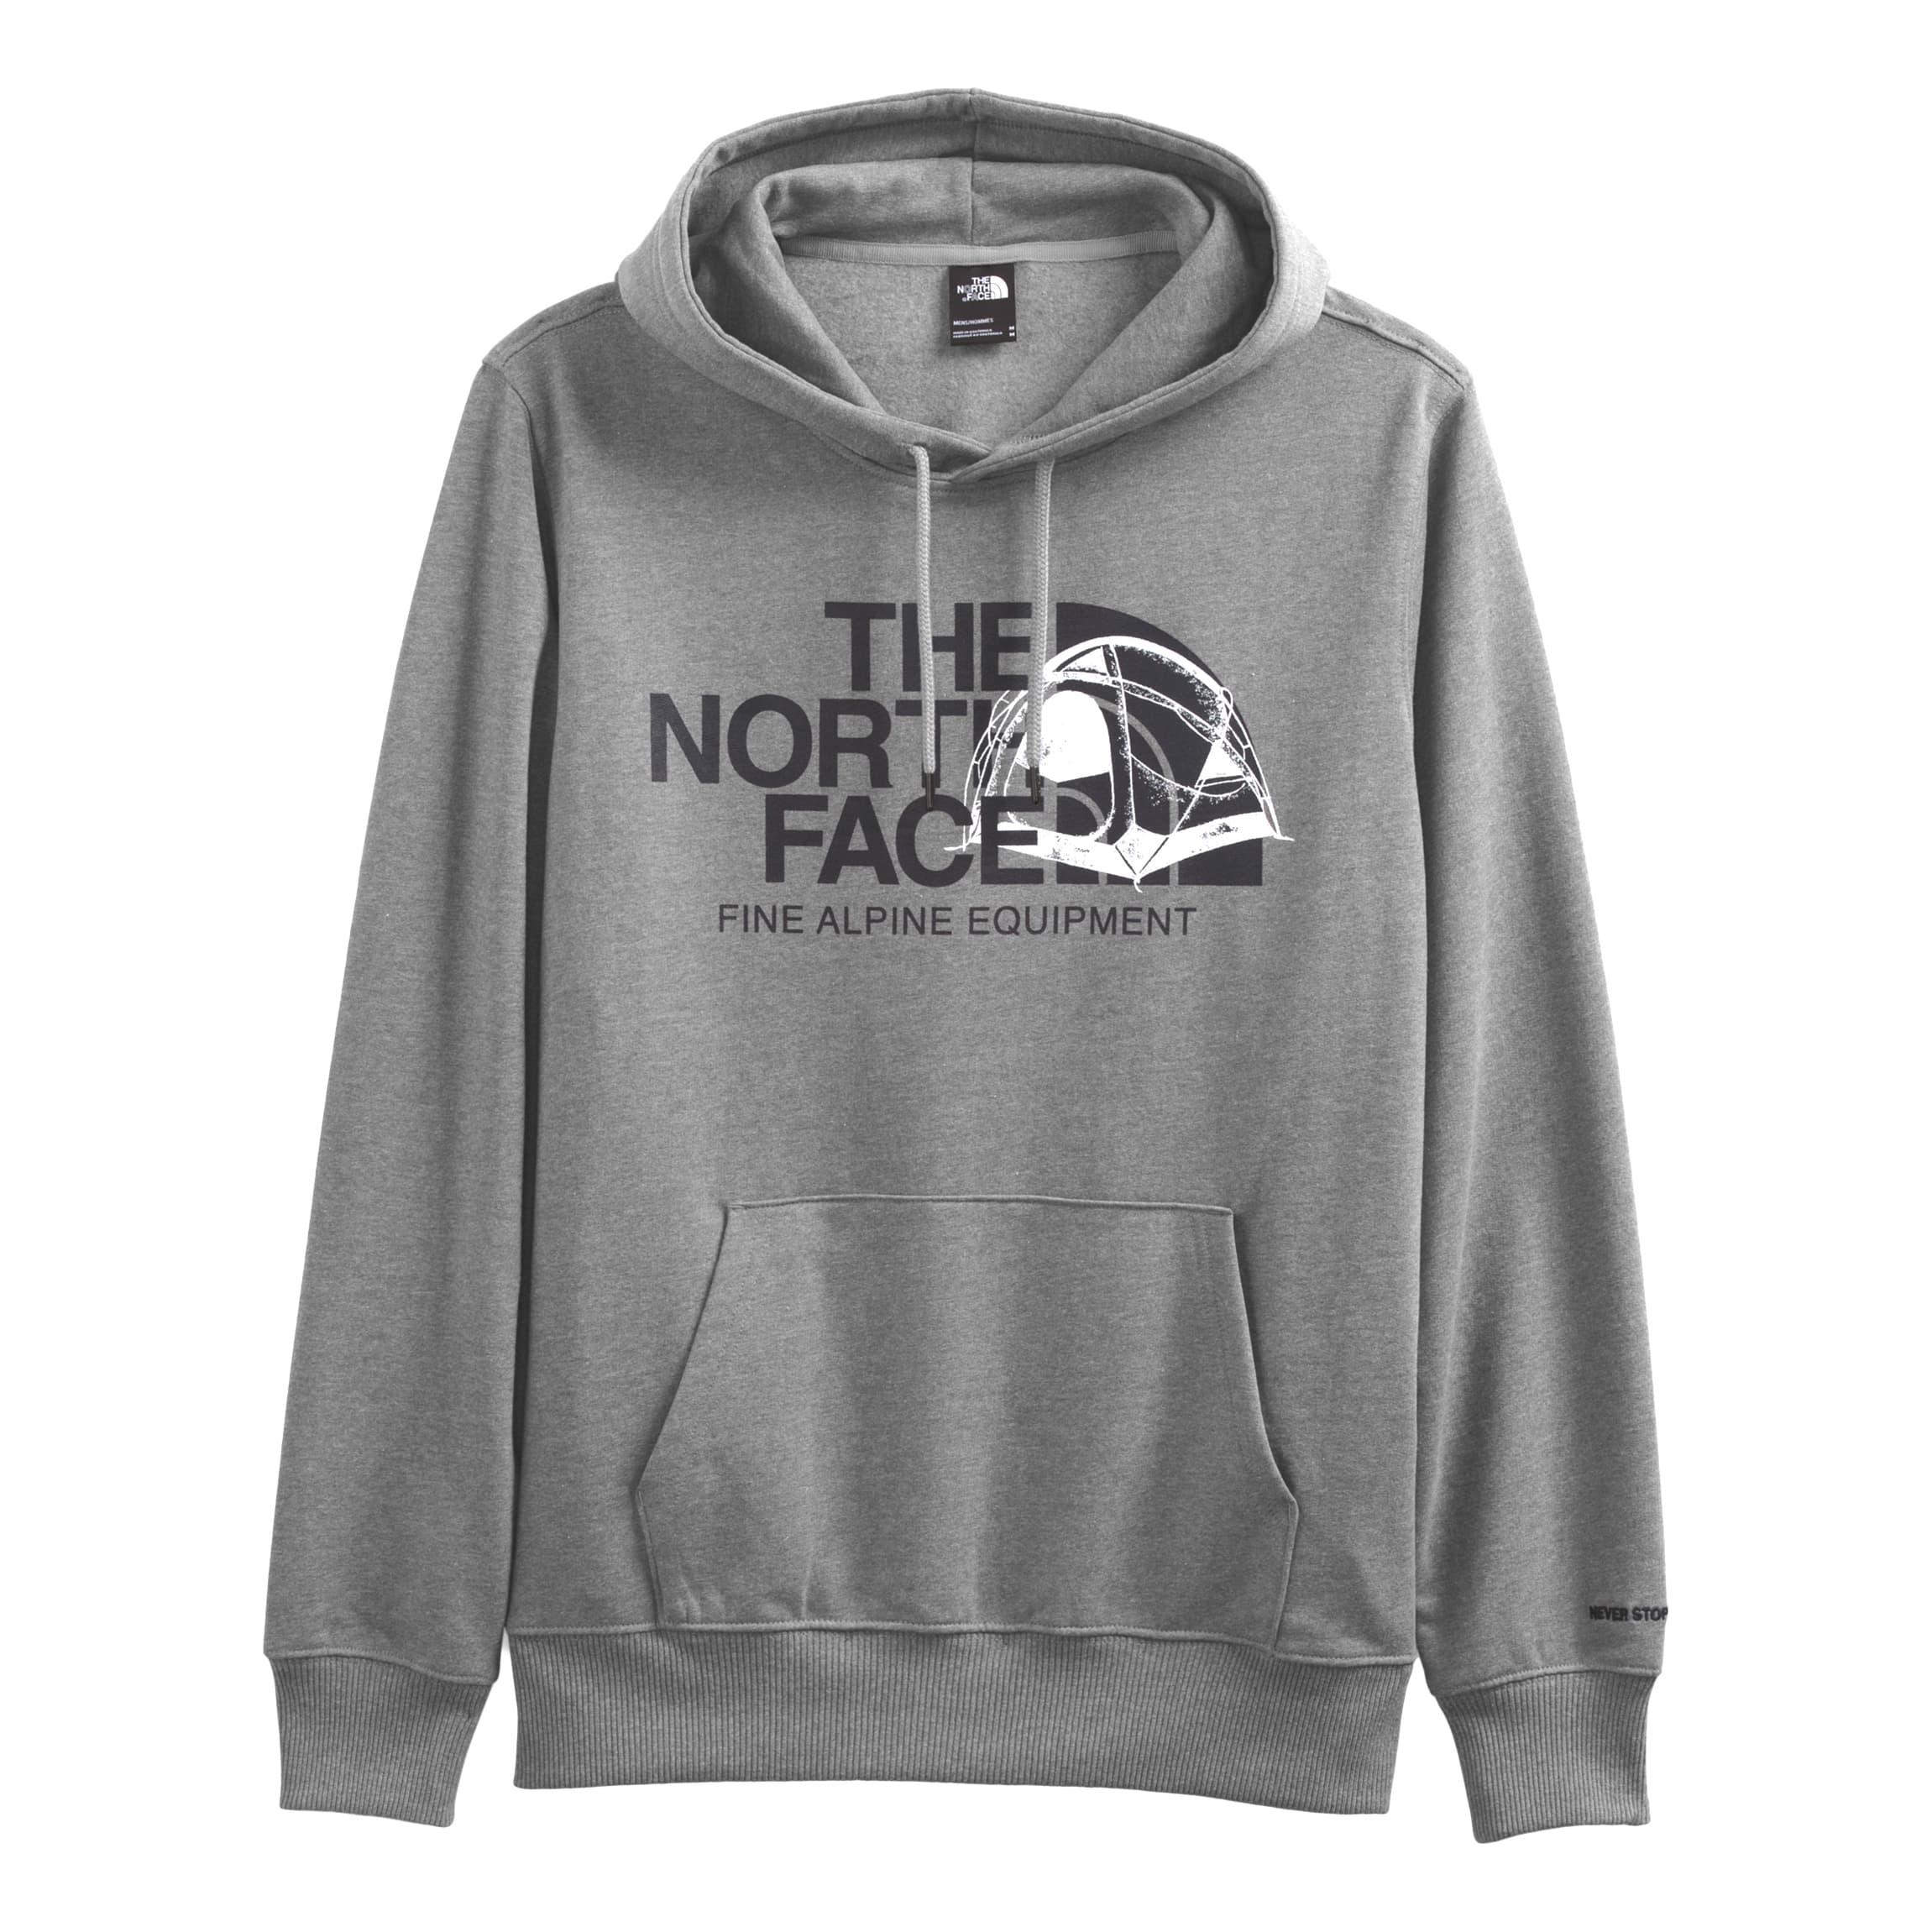 The North Face® Men’s Logo Play Recycled Pullover Hoodie - TNF Medium Grey Heather